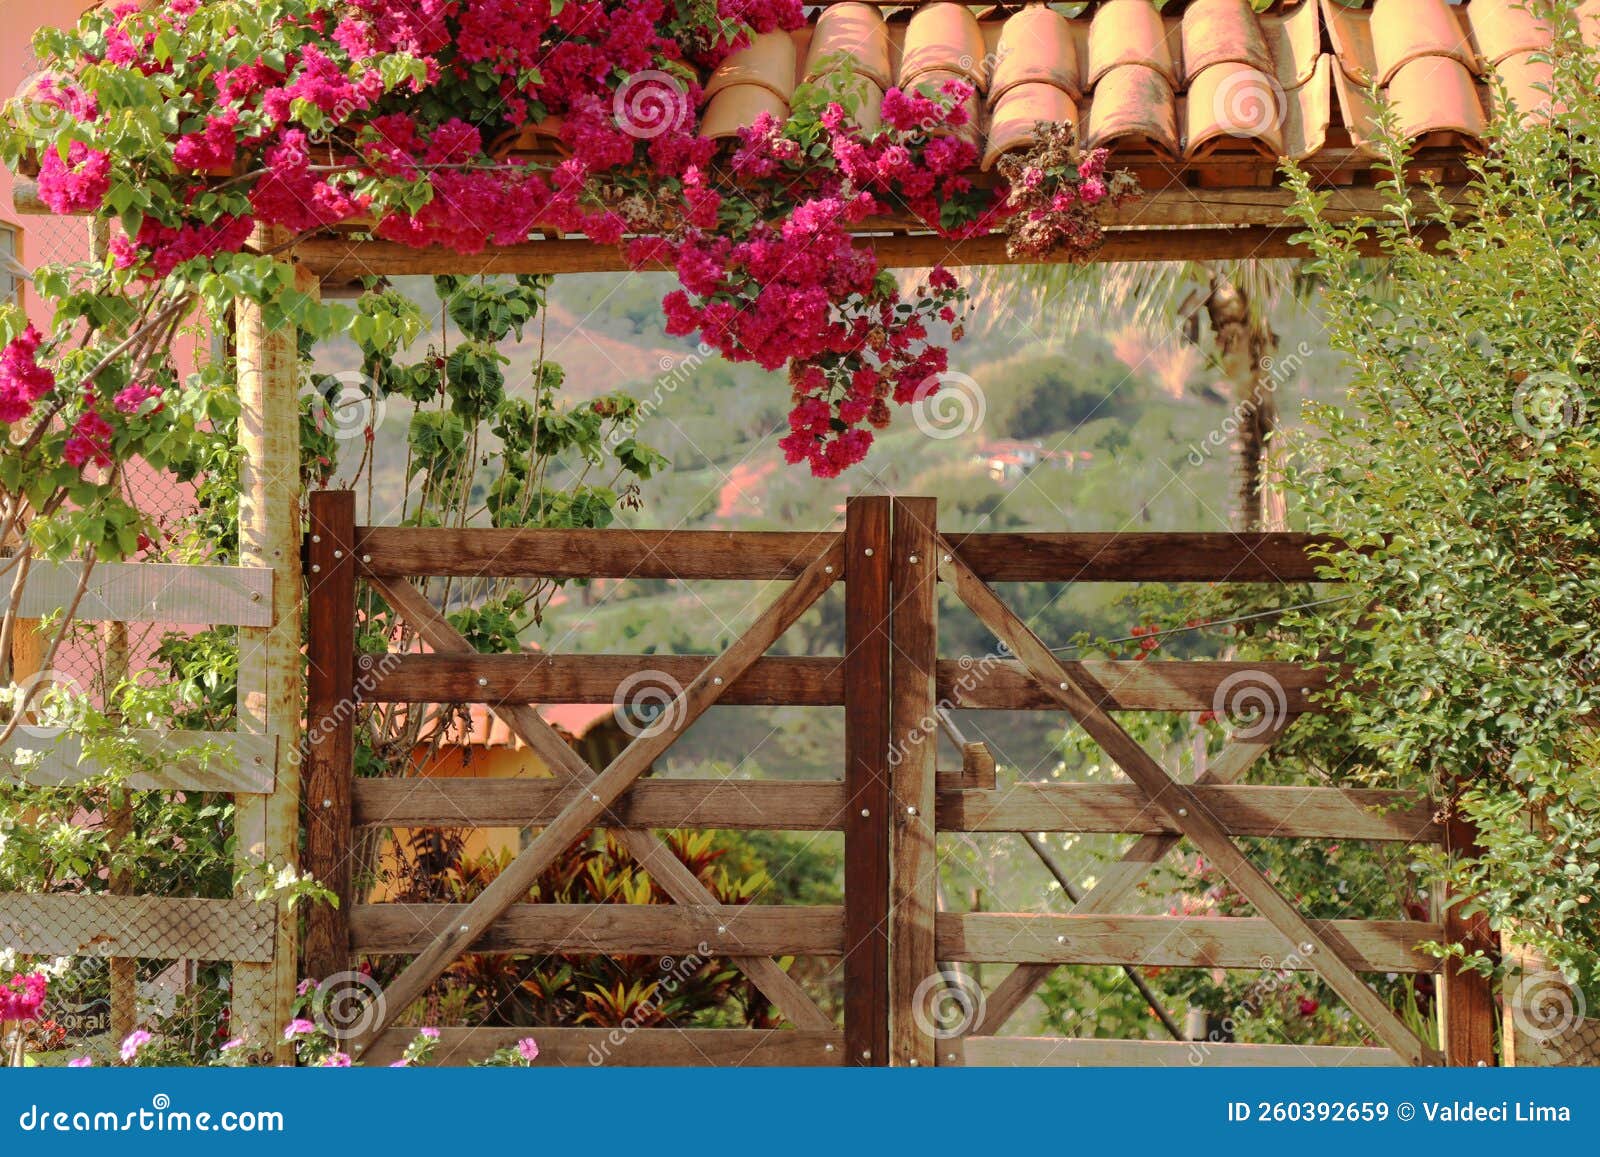 gate with vegetation and blooming bounganville  small community of cabeÃÂ§a de boi village in minas gerais